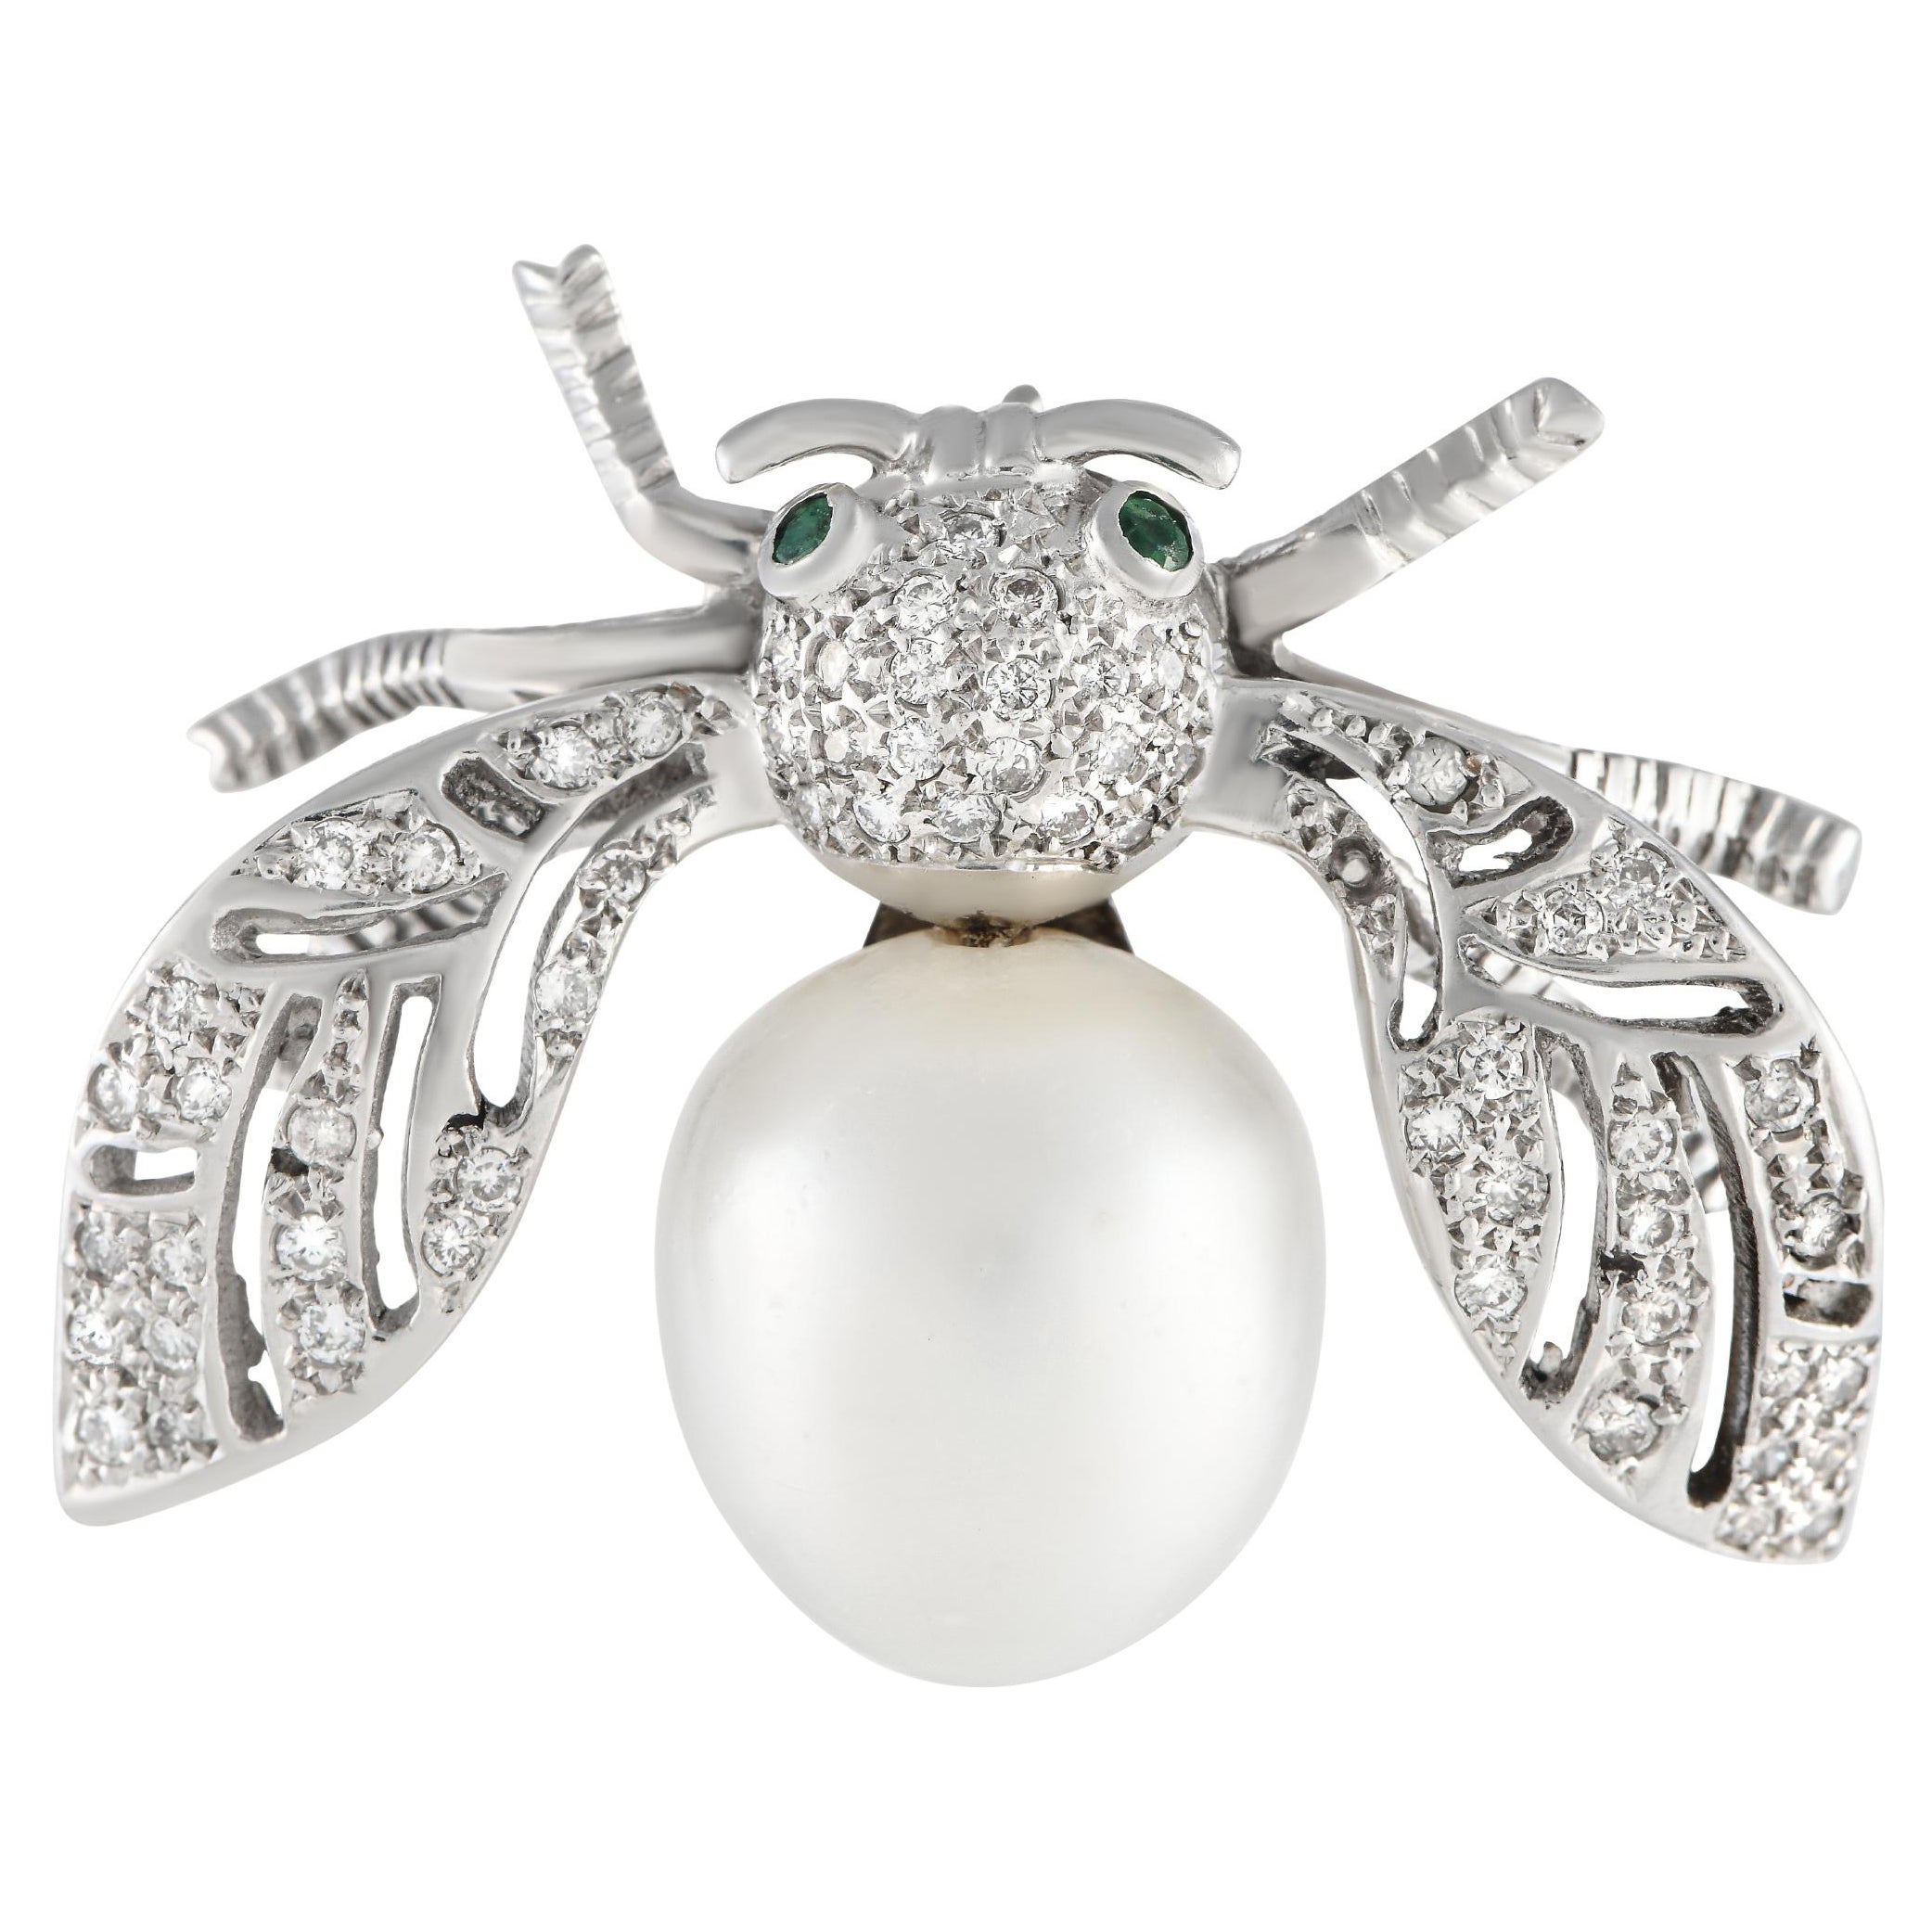 LB Exclusive 18k White Gold 0.60 Carat Diamond and Pearl Insect Brooch